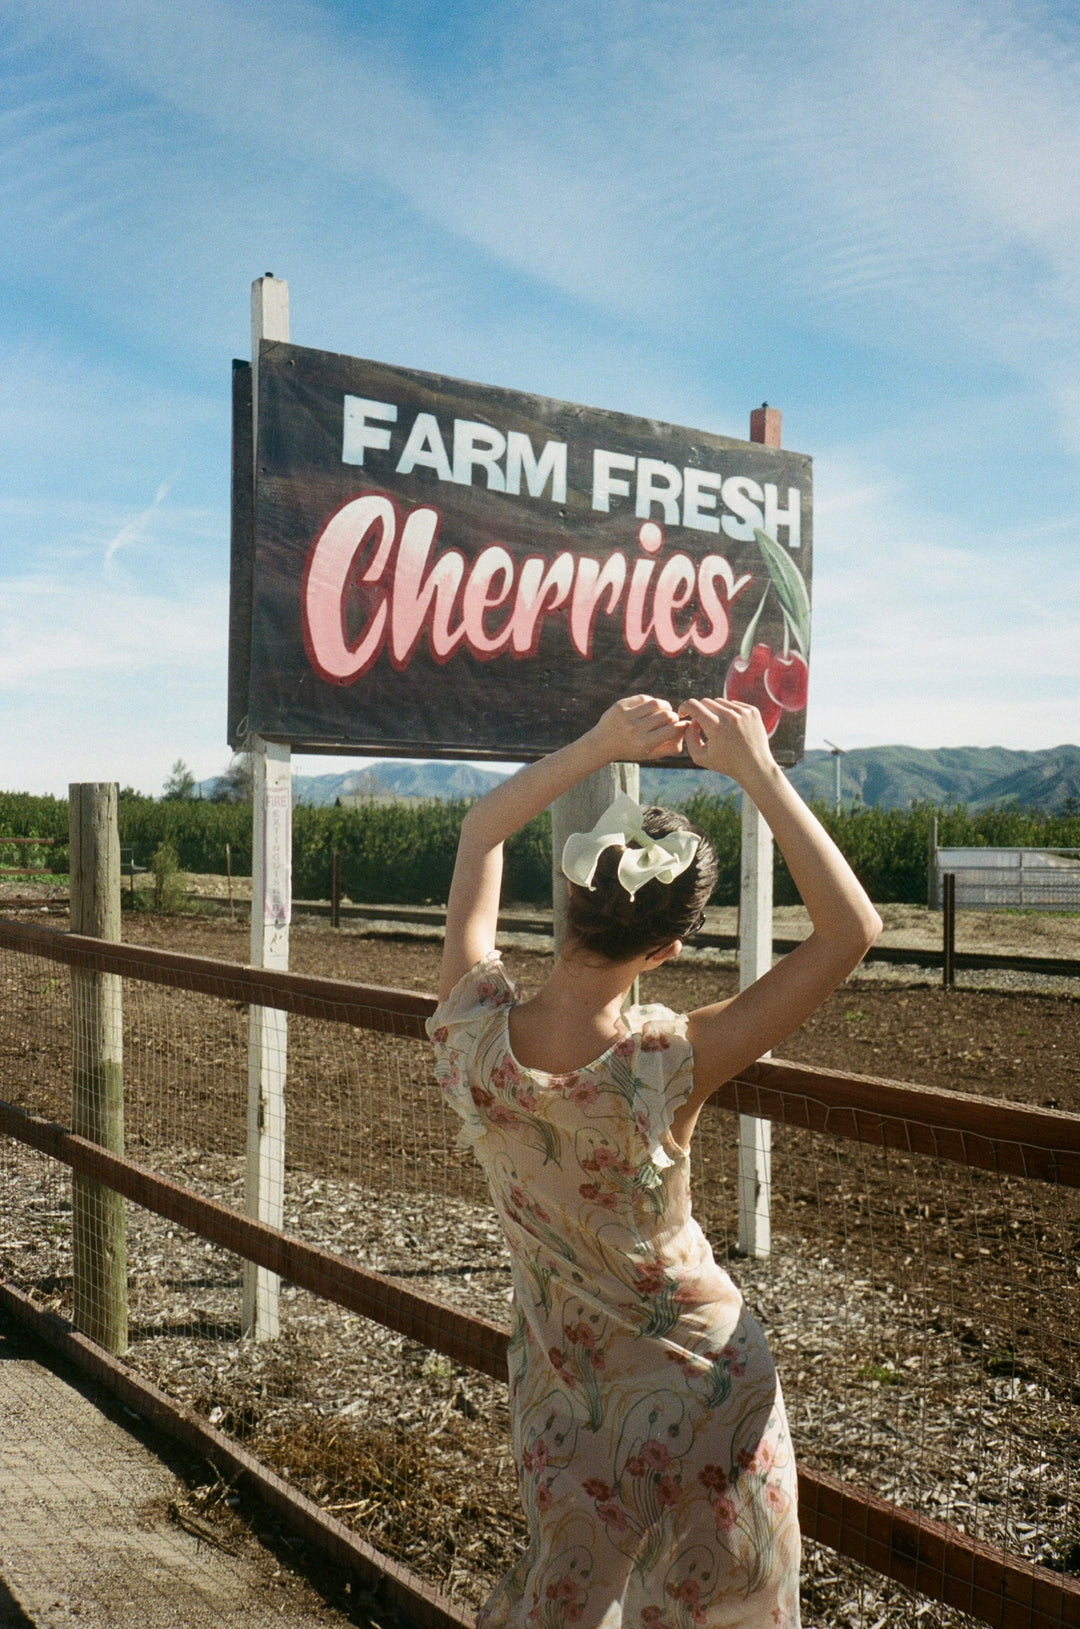 model standing in front of farm fresh cherries sign with bow barrette in hair